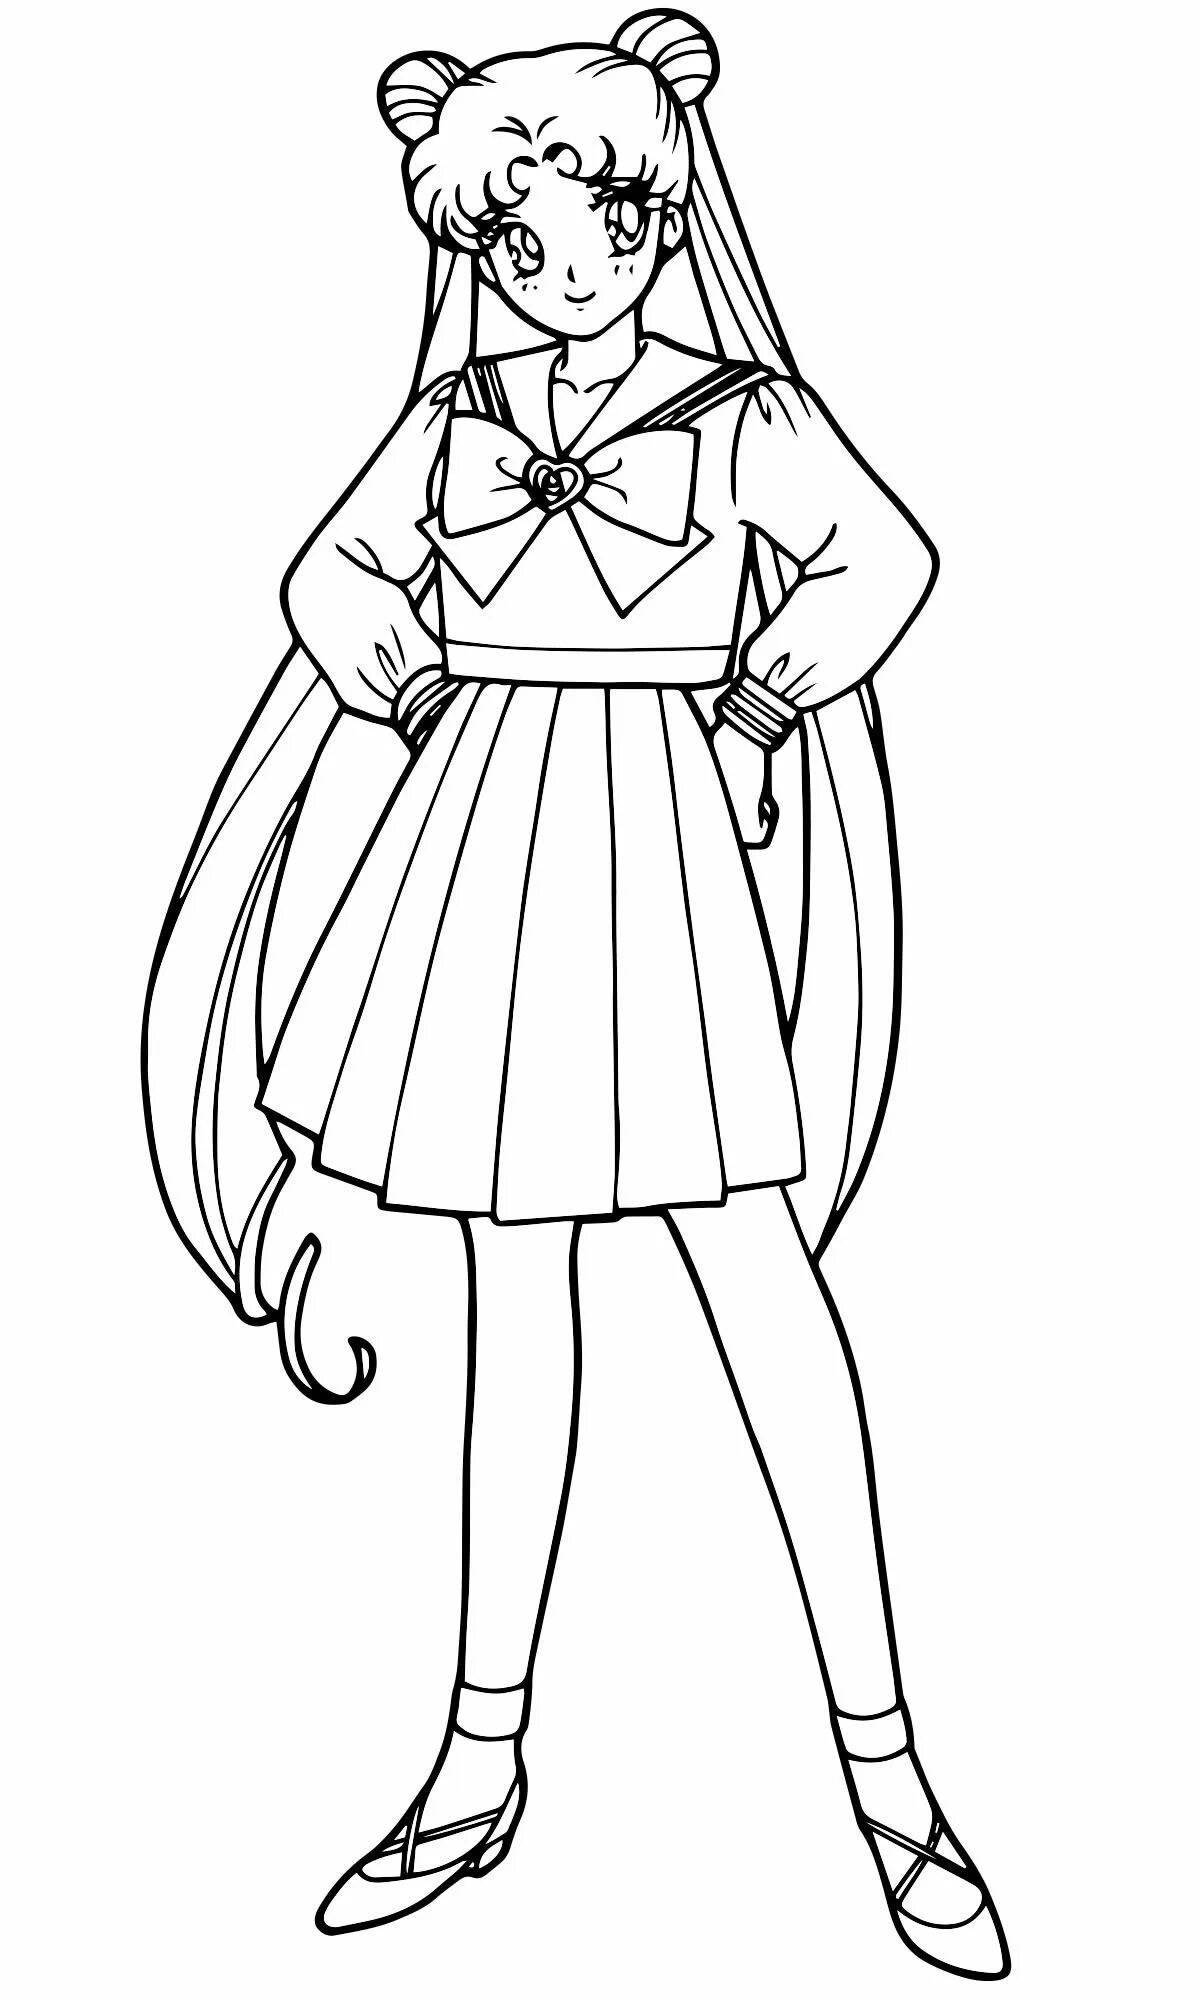 Awesome full length anime girl coloring pages